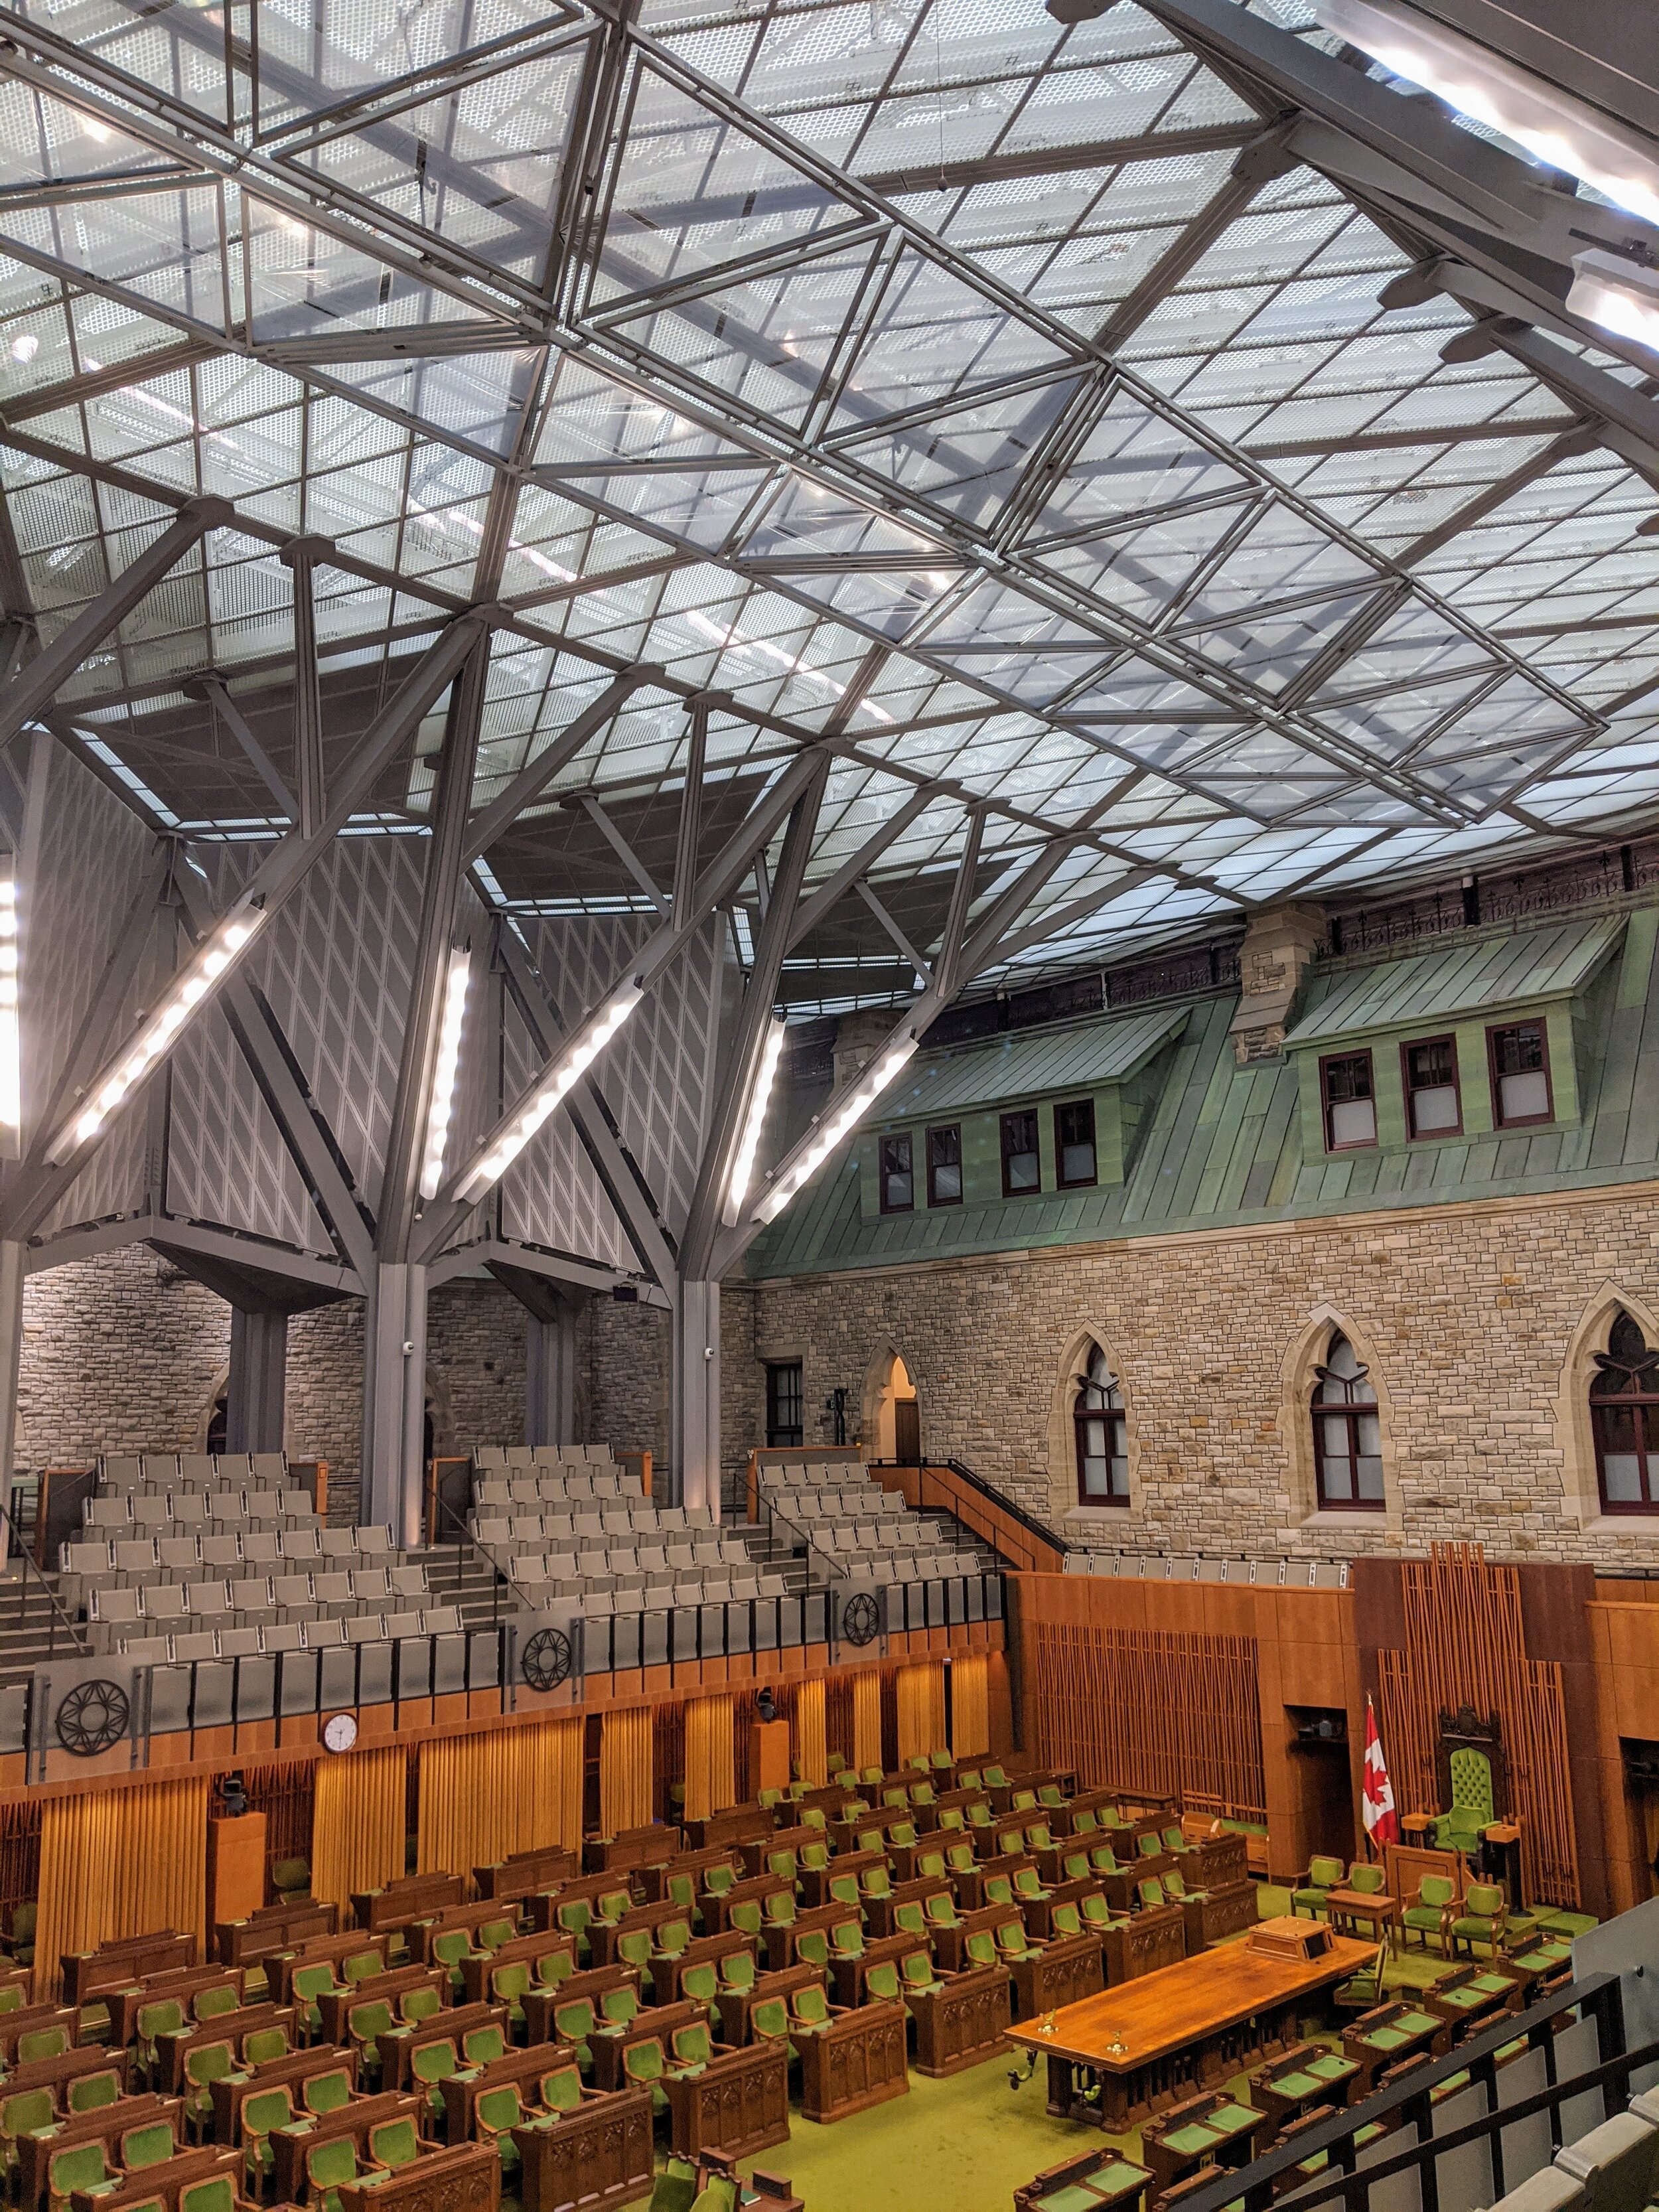 Inside of the new house of commons in the Parliament building in Ottawa